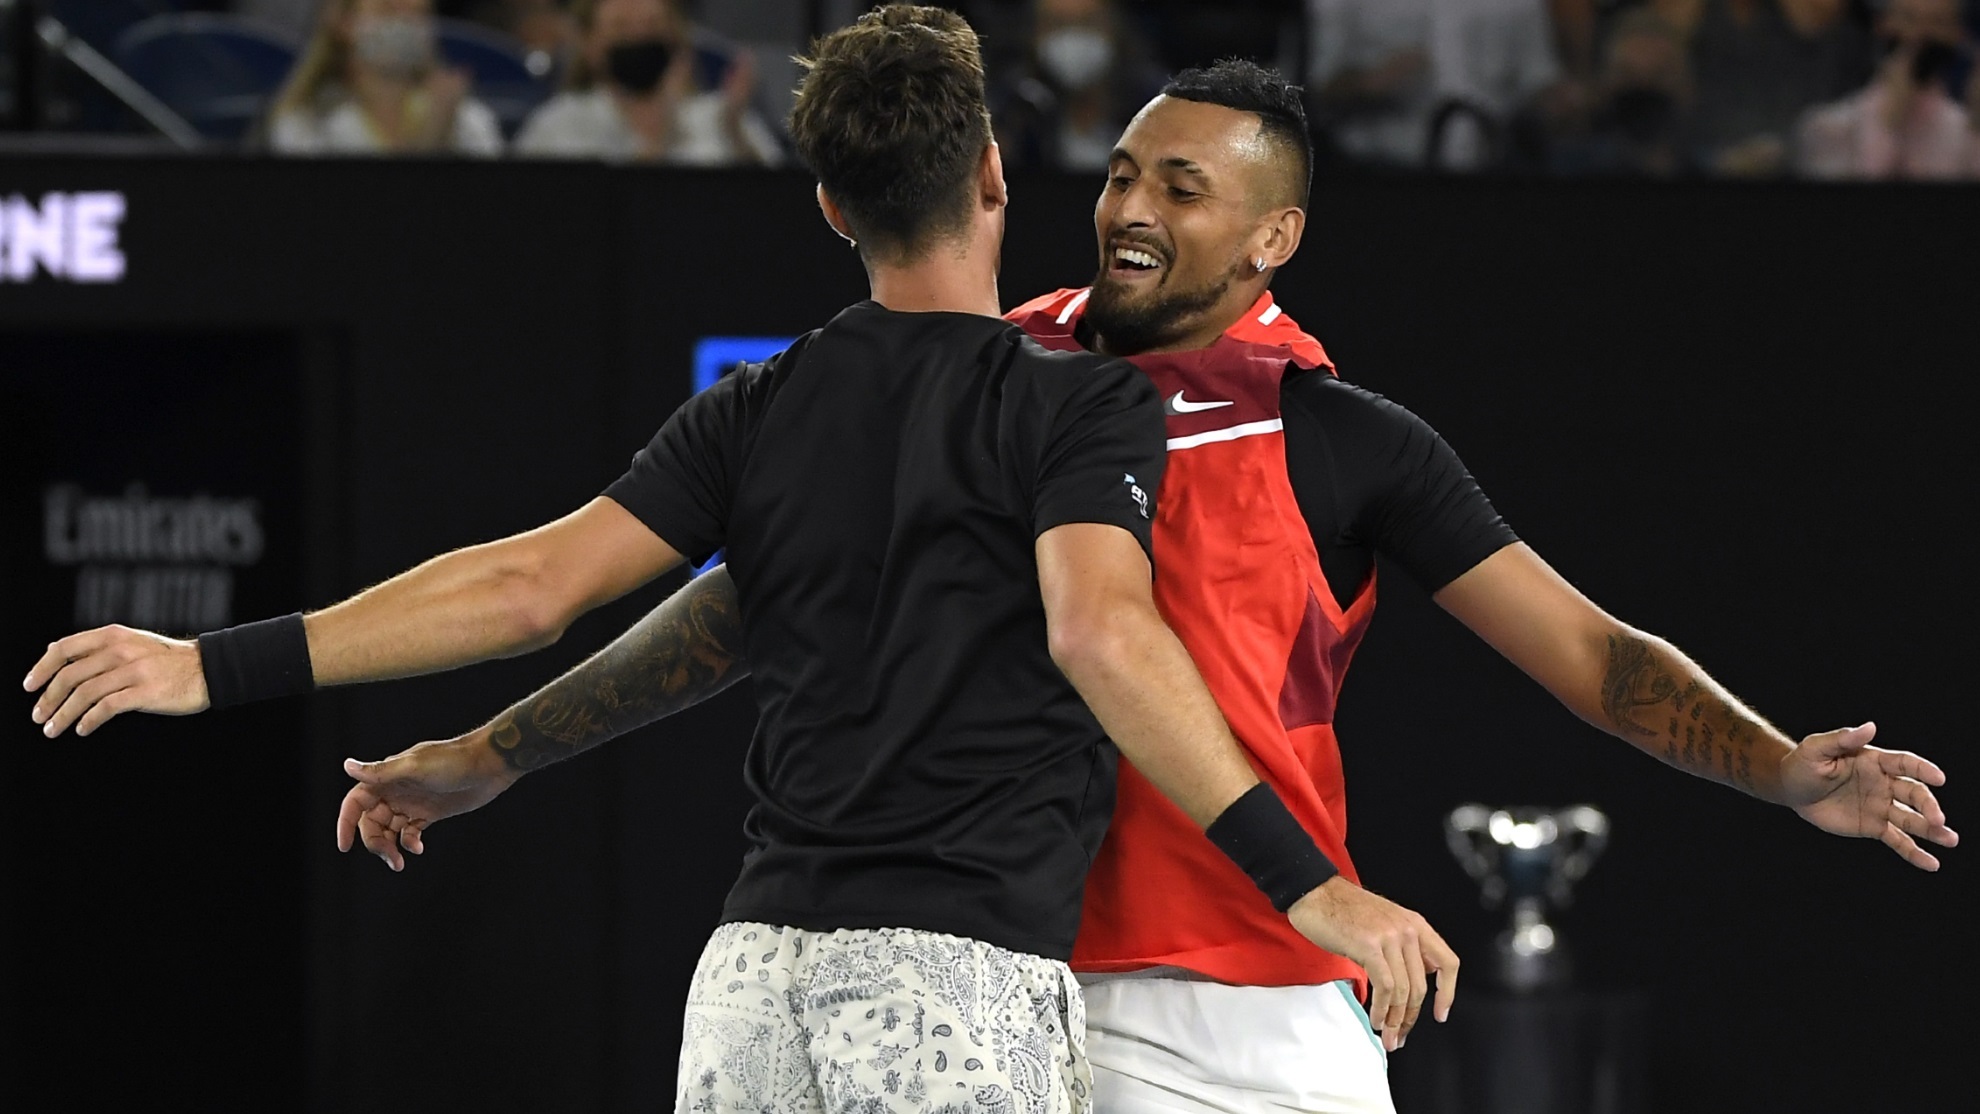 Nick Kyrgios, right, and Thanasi Kokkinakis of Australia celebrate after defeating compatriots Matthew Ebden and Max Purcell.